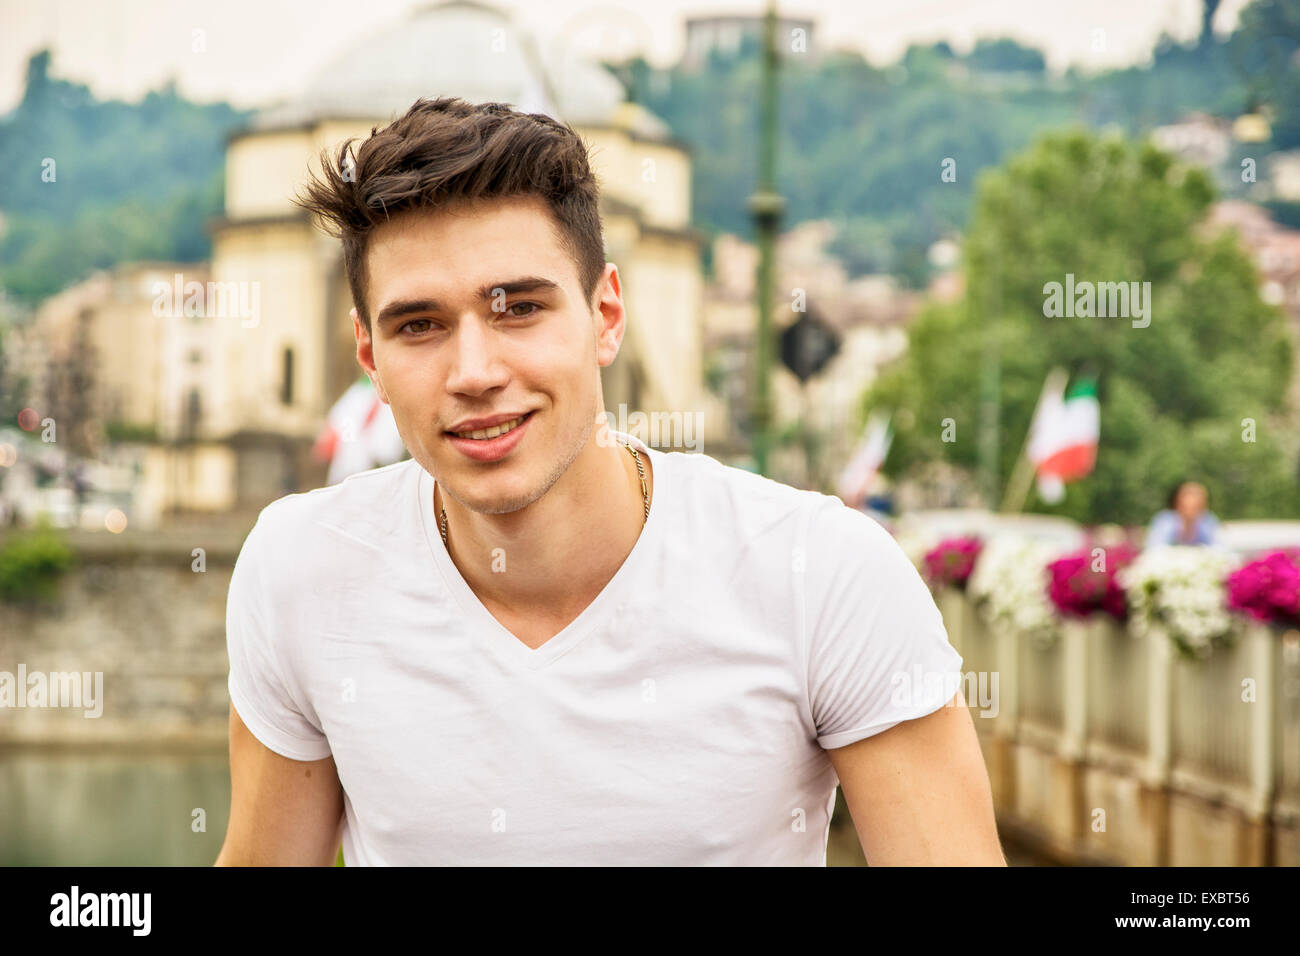 Handsome young man in white t-shirt outdoor in city setting, looking at camera, smiling Stock Photo